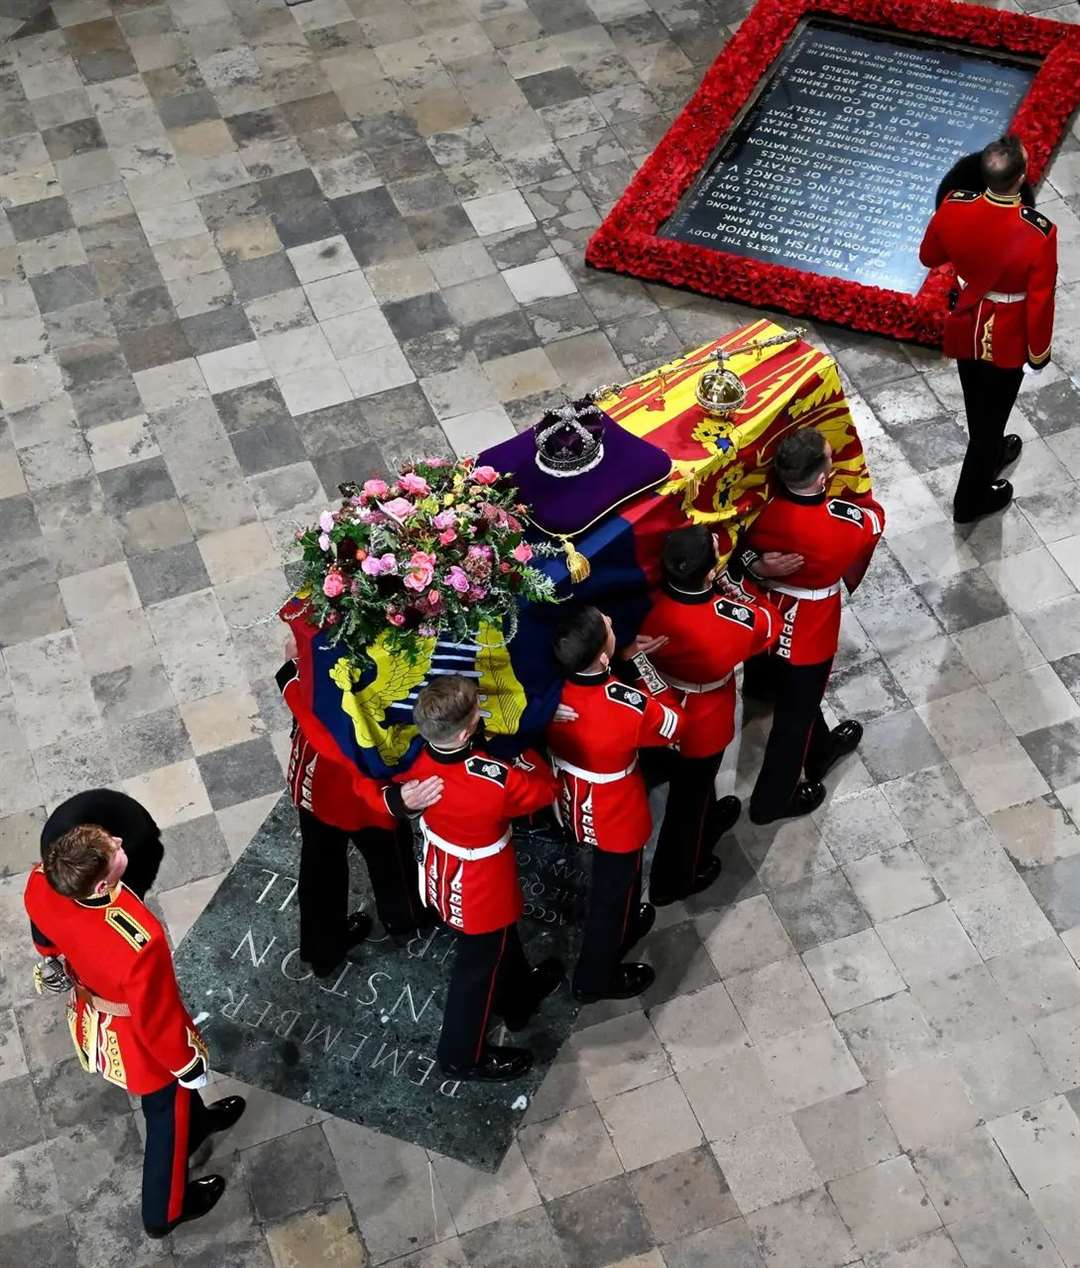 L Cpl Tony Flynn was part of Her Majesty's funeral on Monday. Photo: Gareth Cattermole/PA